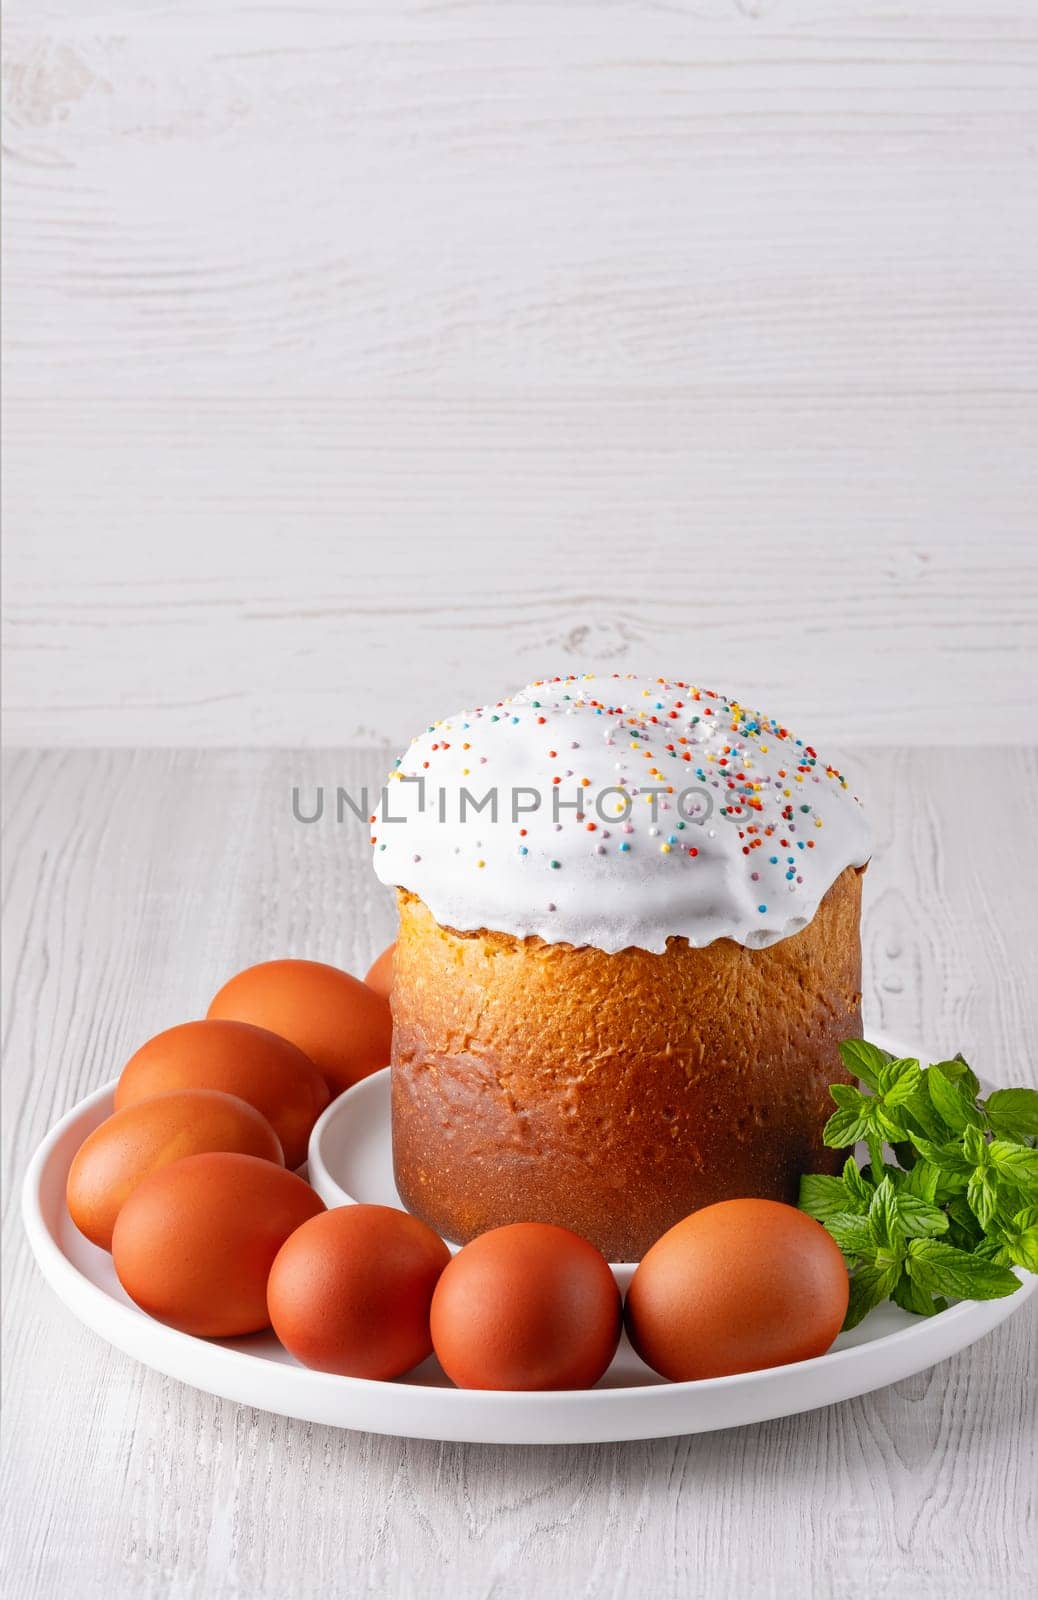 Delicious Easter cake and eggs on light background, with copy space for text.